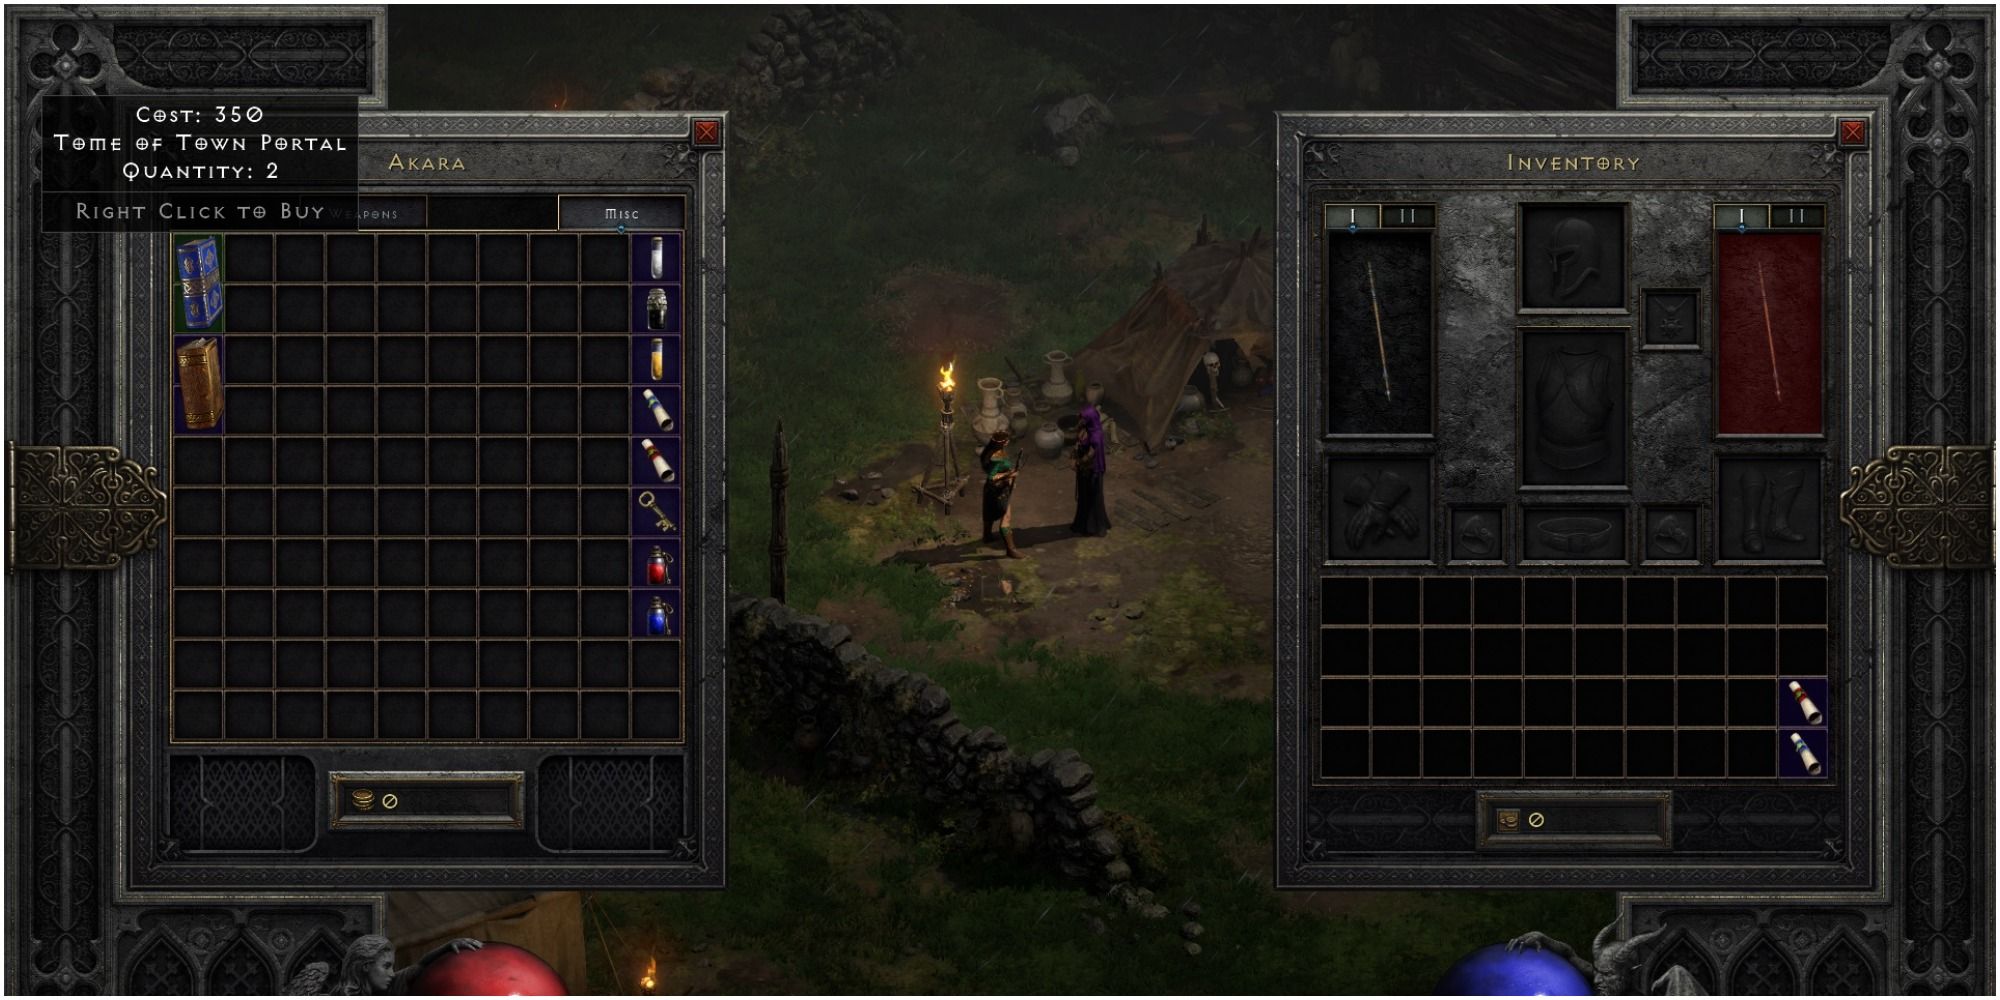 Diablo 2 Resurrected Purchasing A Tome Of Town Portal From Akara